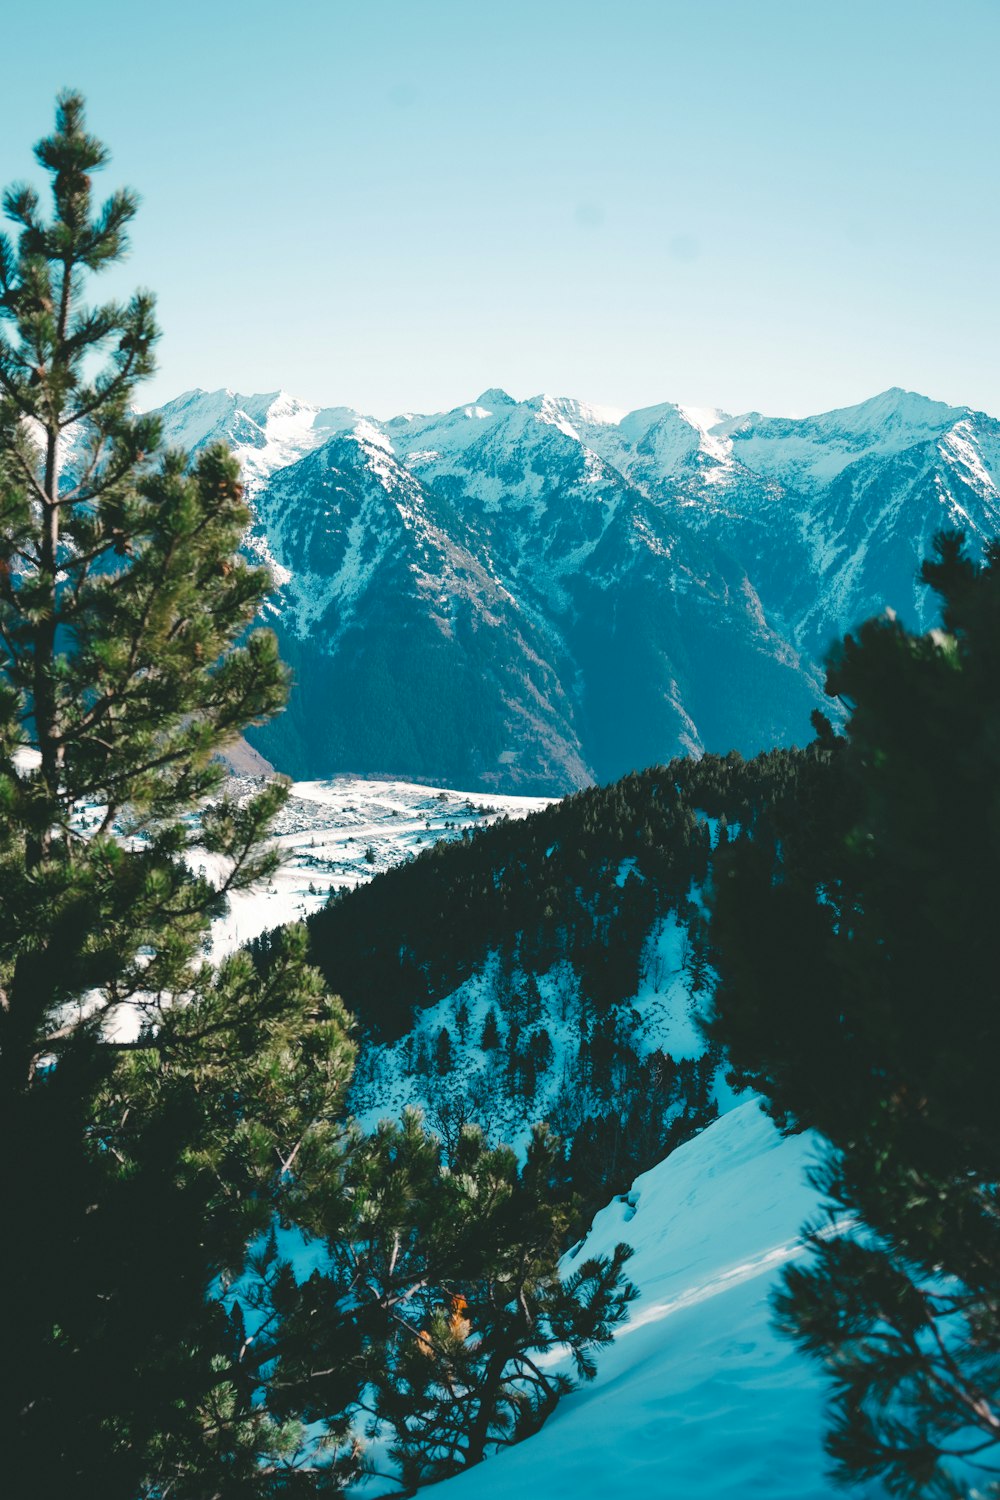 a view of a snowy mountain range with pine trees